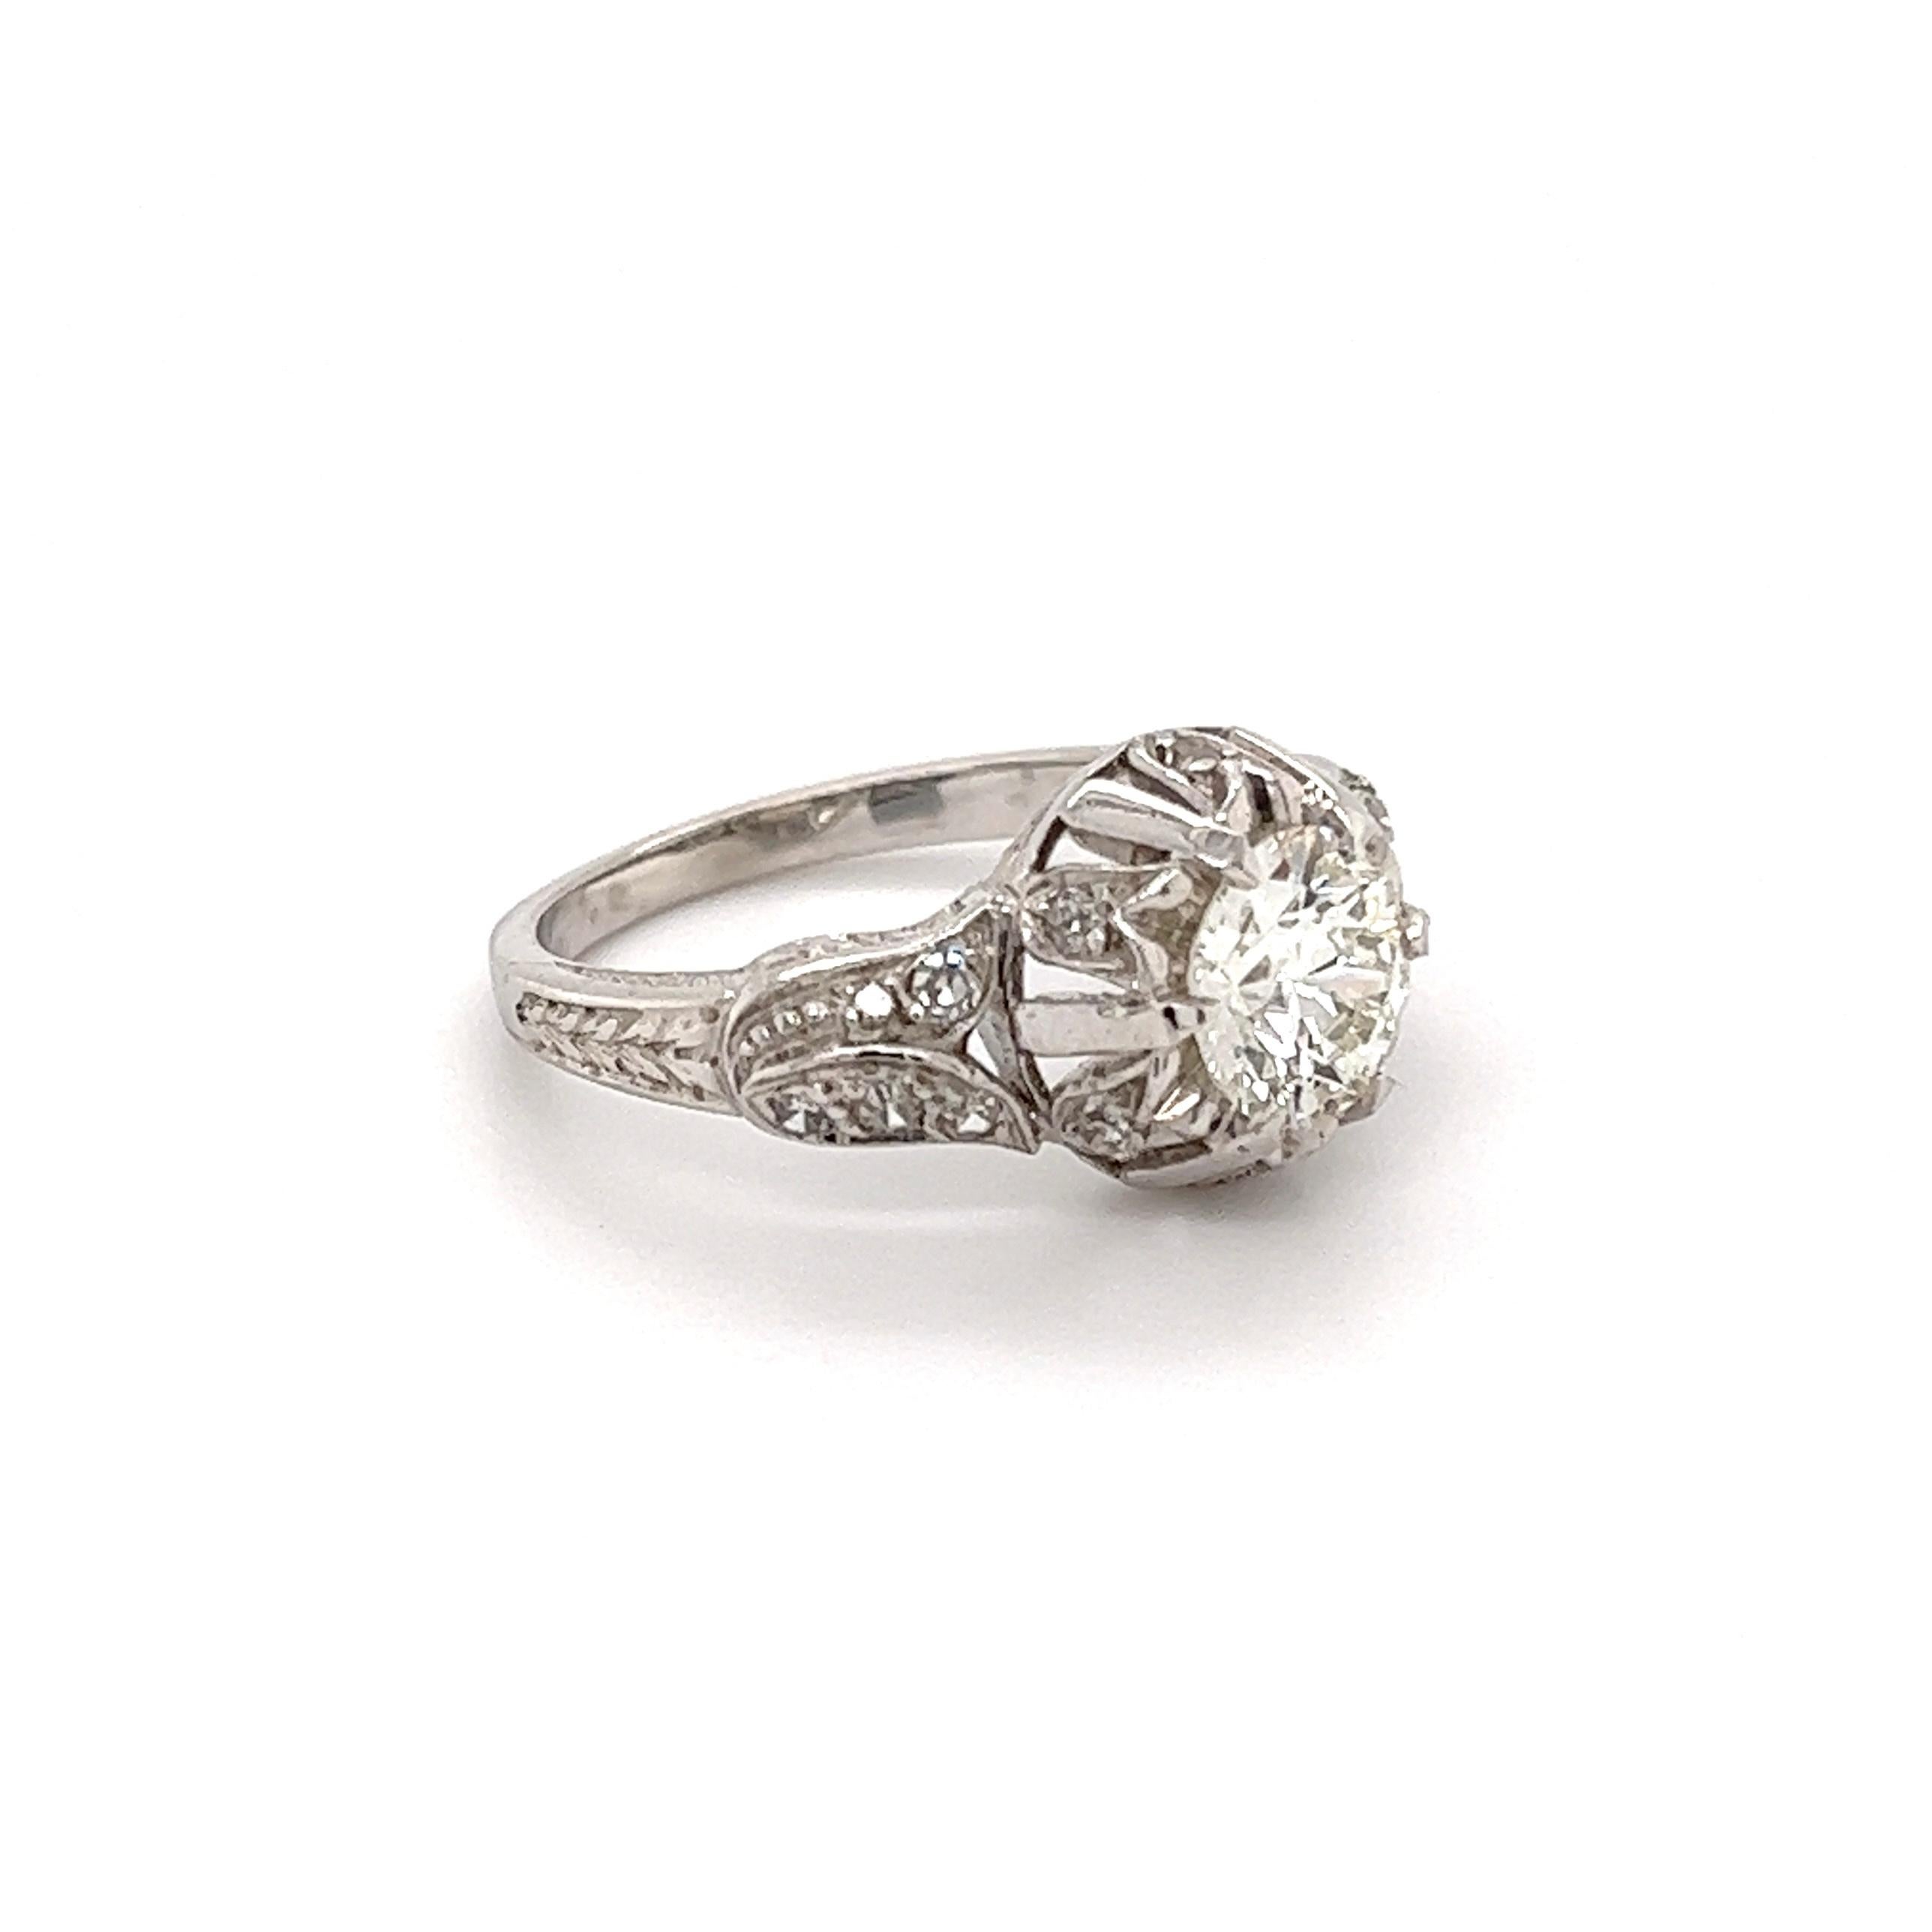 Simply Beautiful! Finely detailed Diamond Solitaire Platinum Ring. Centering a securely nestled GIA Old European Cut Diamond, weighing approx. 1.12 Carats, GIA #2195881235; J-VS2. Accented by Diamonds weighing approx. 0.18tcw. Approx. dimensions: